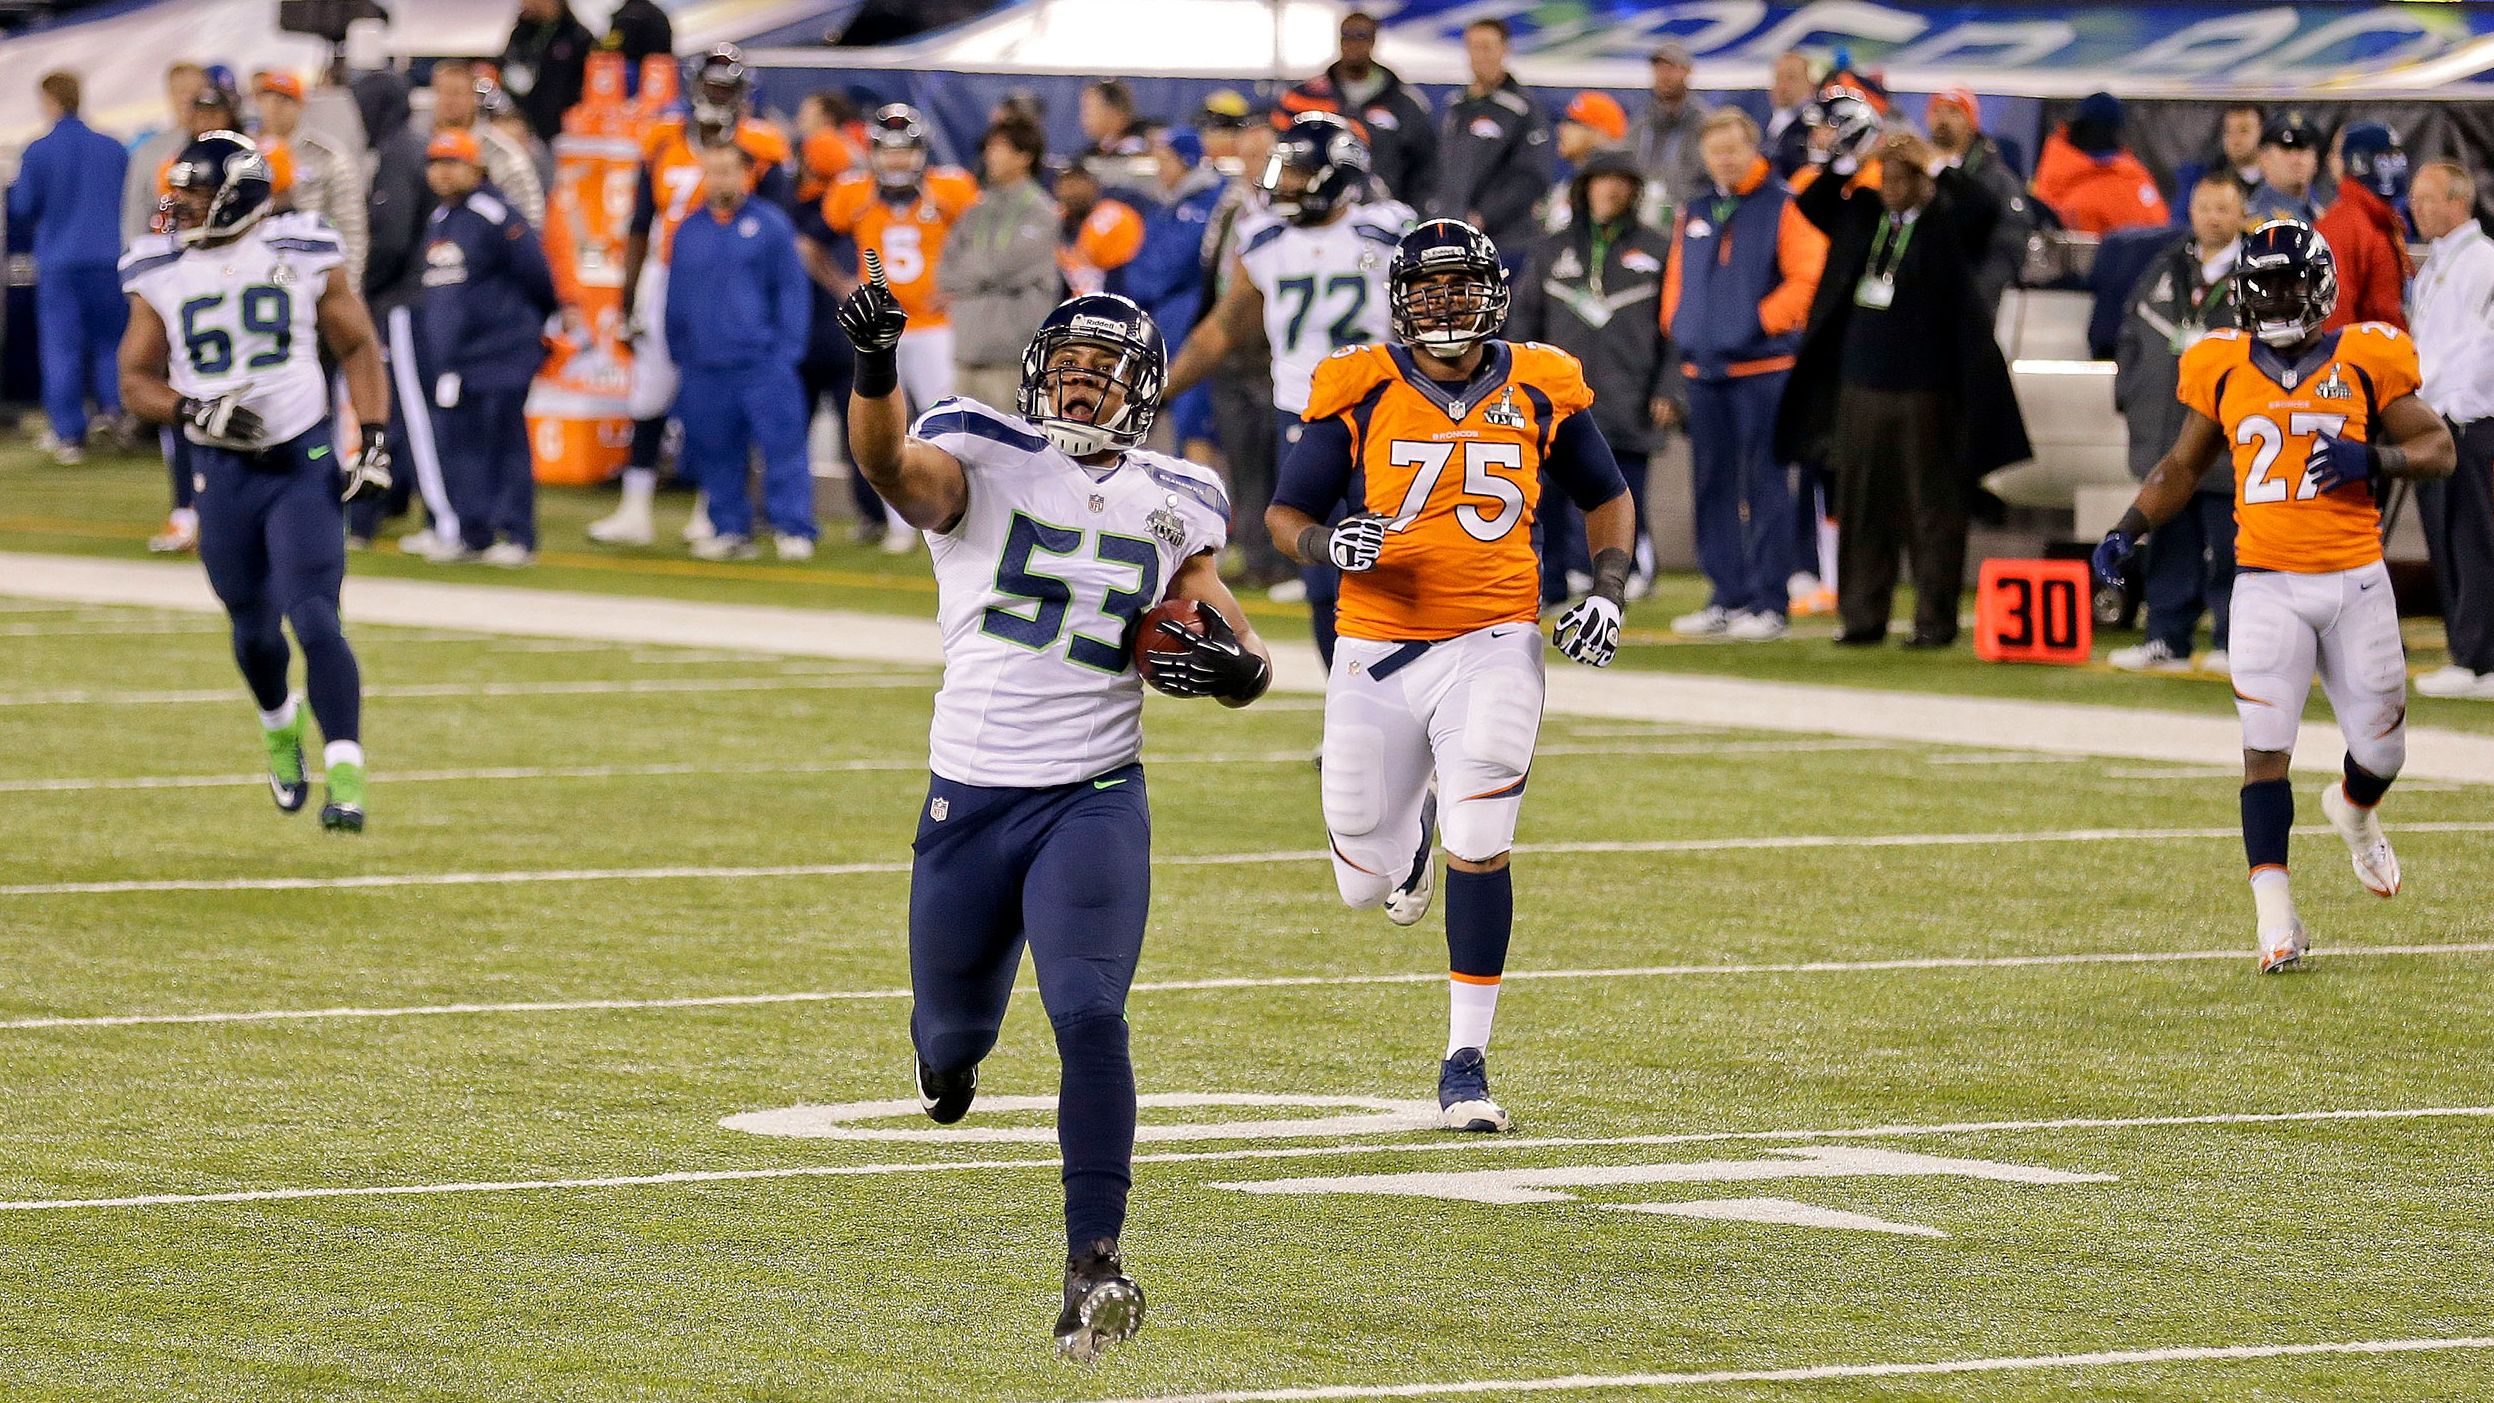 <strong>Super Bowl XLVIII (2014):</strong> Seattle Seahawks linebacker Malcolm Smith runs an interception back for a touchdown during Seattle's 43-8 drubbing of Denver in Super Bowl XLVIII. Smith and Seattle's "Legion of Boom" defense stifled Peyton Manning and Denver's No. 1-rated offense.